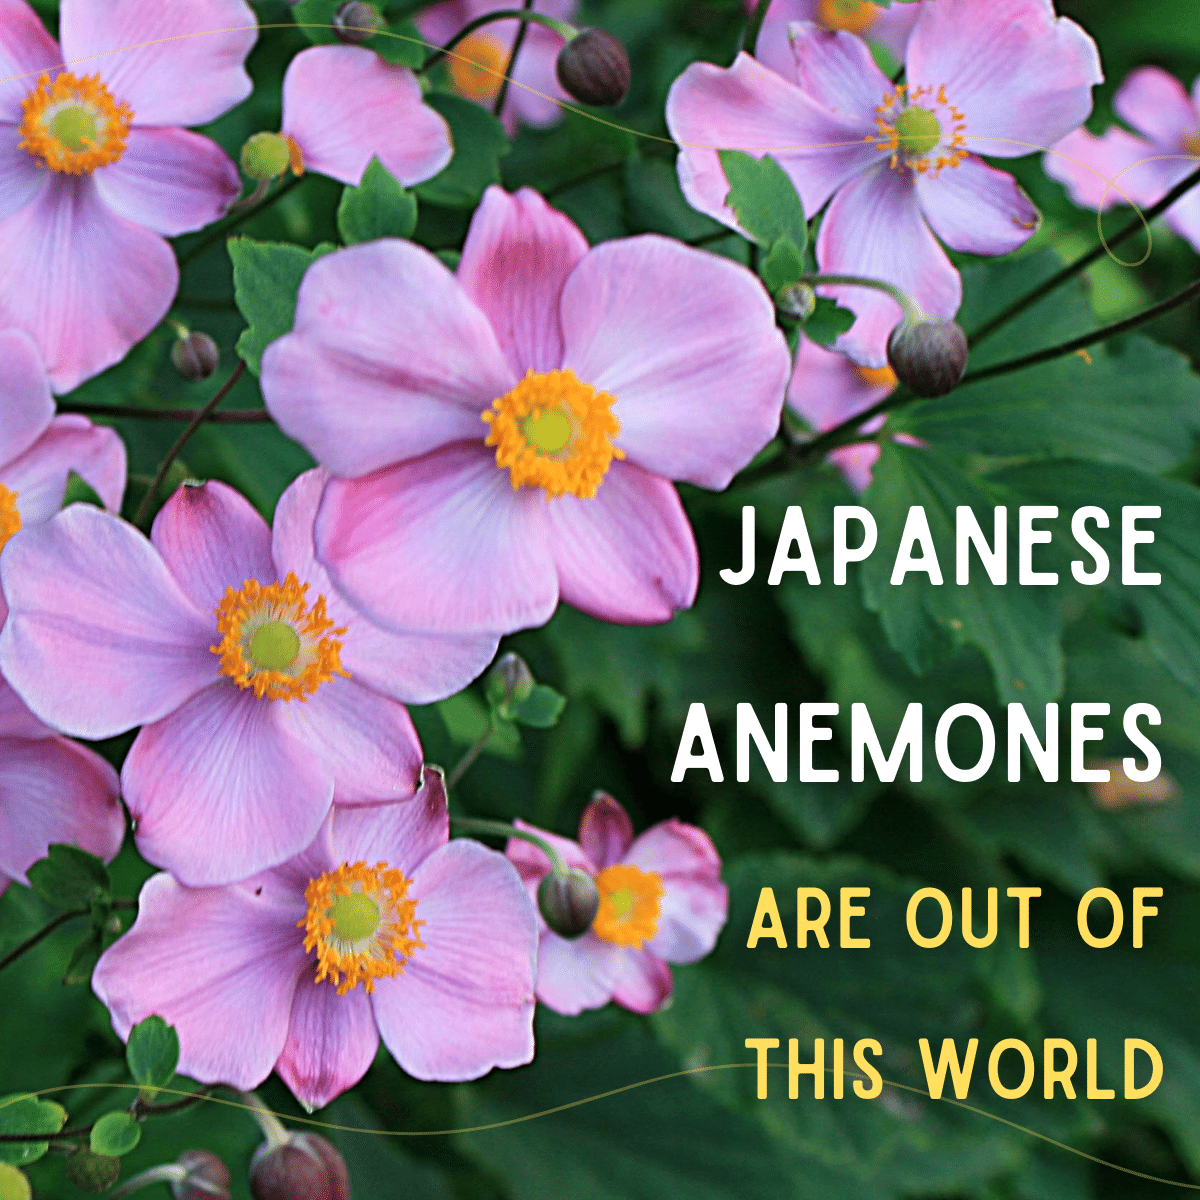 Japanese Anemones Are Out of This World